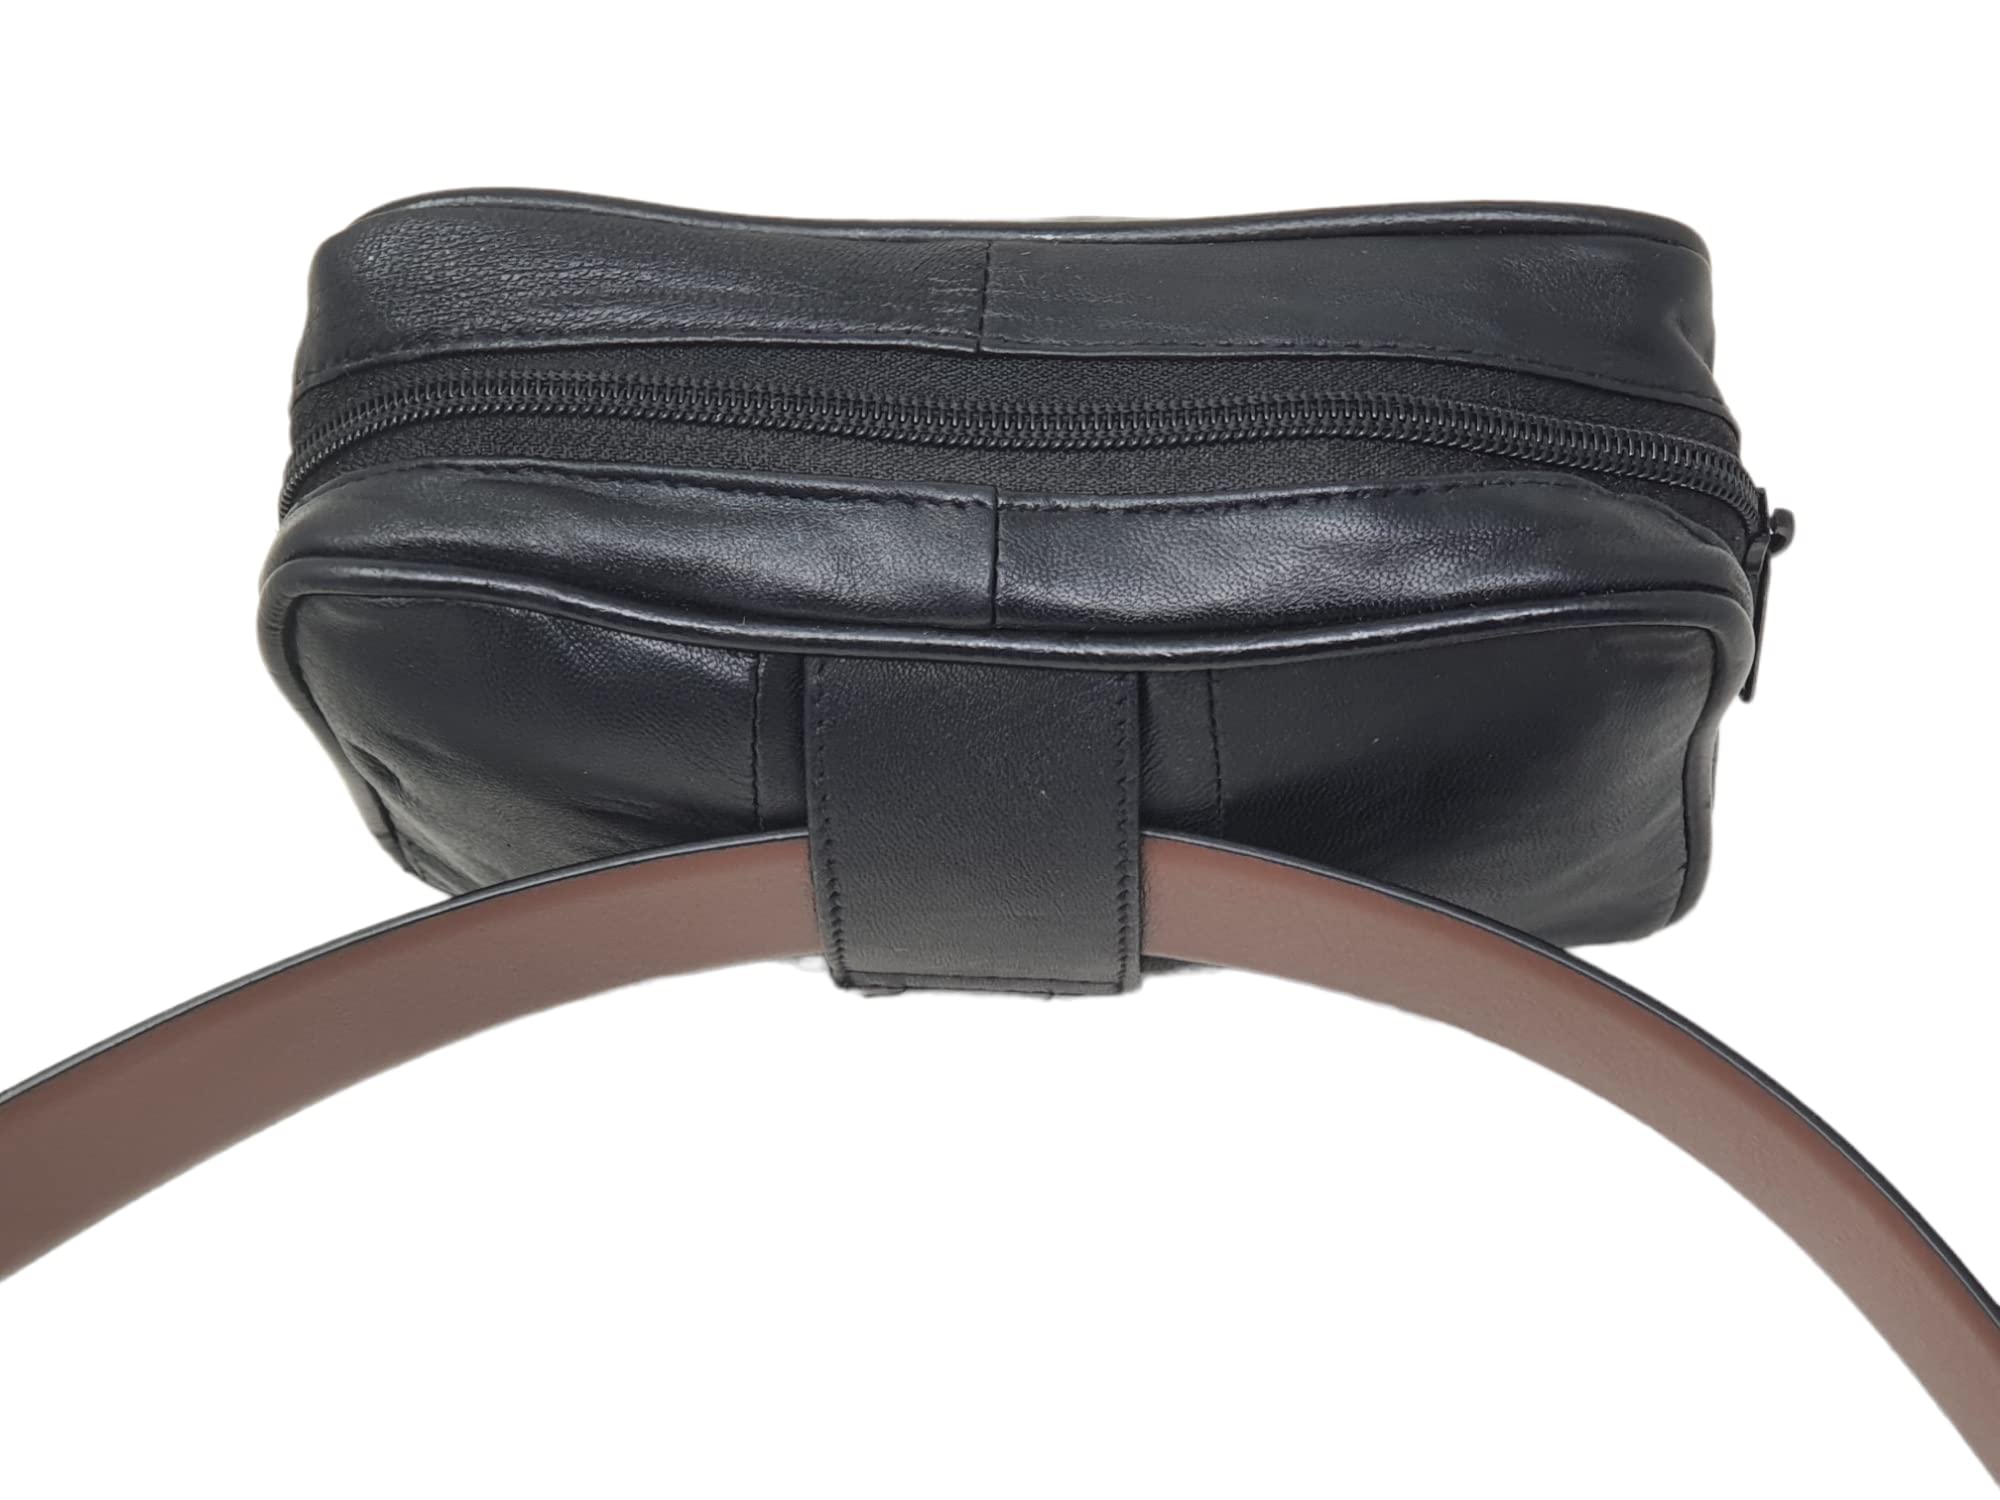 RAS WALLETS Men's Leather Waist Bag Coin Purse Pouch With Belt Loop 17 x 11 x 4.5 Black